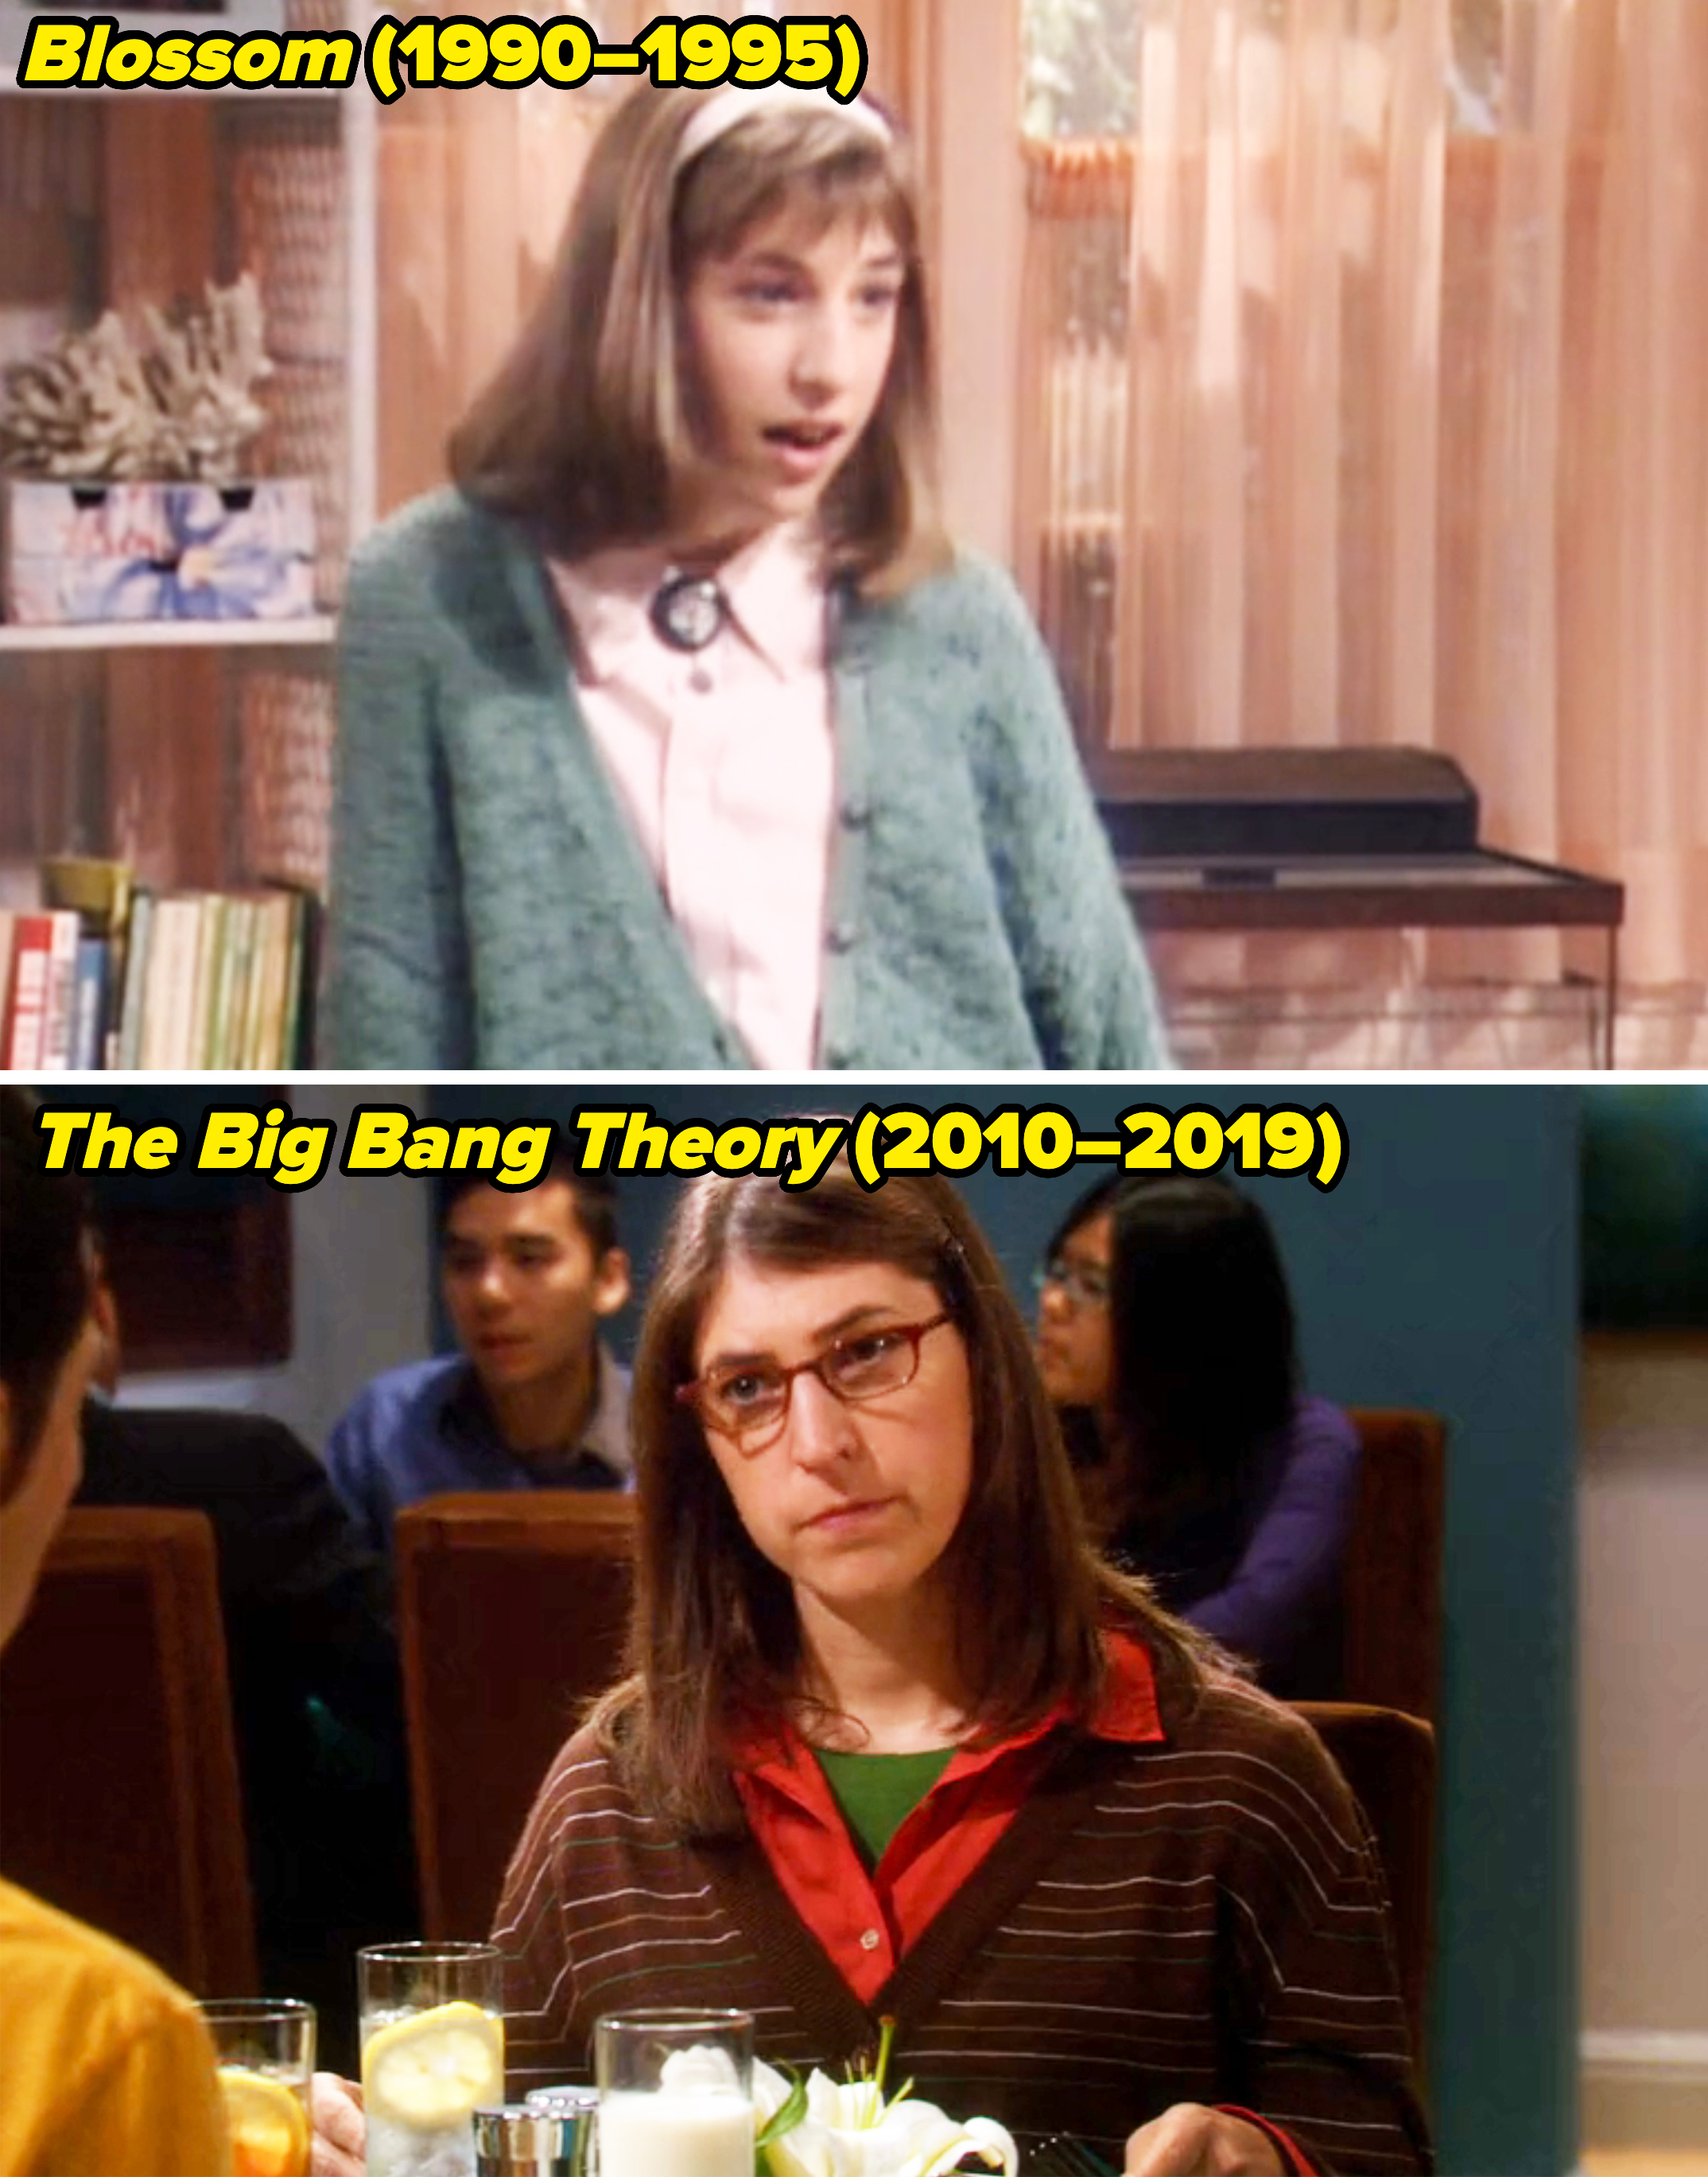 closeup of her as a kid and then later in the big bang theory